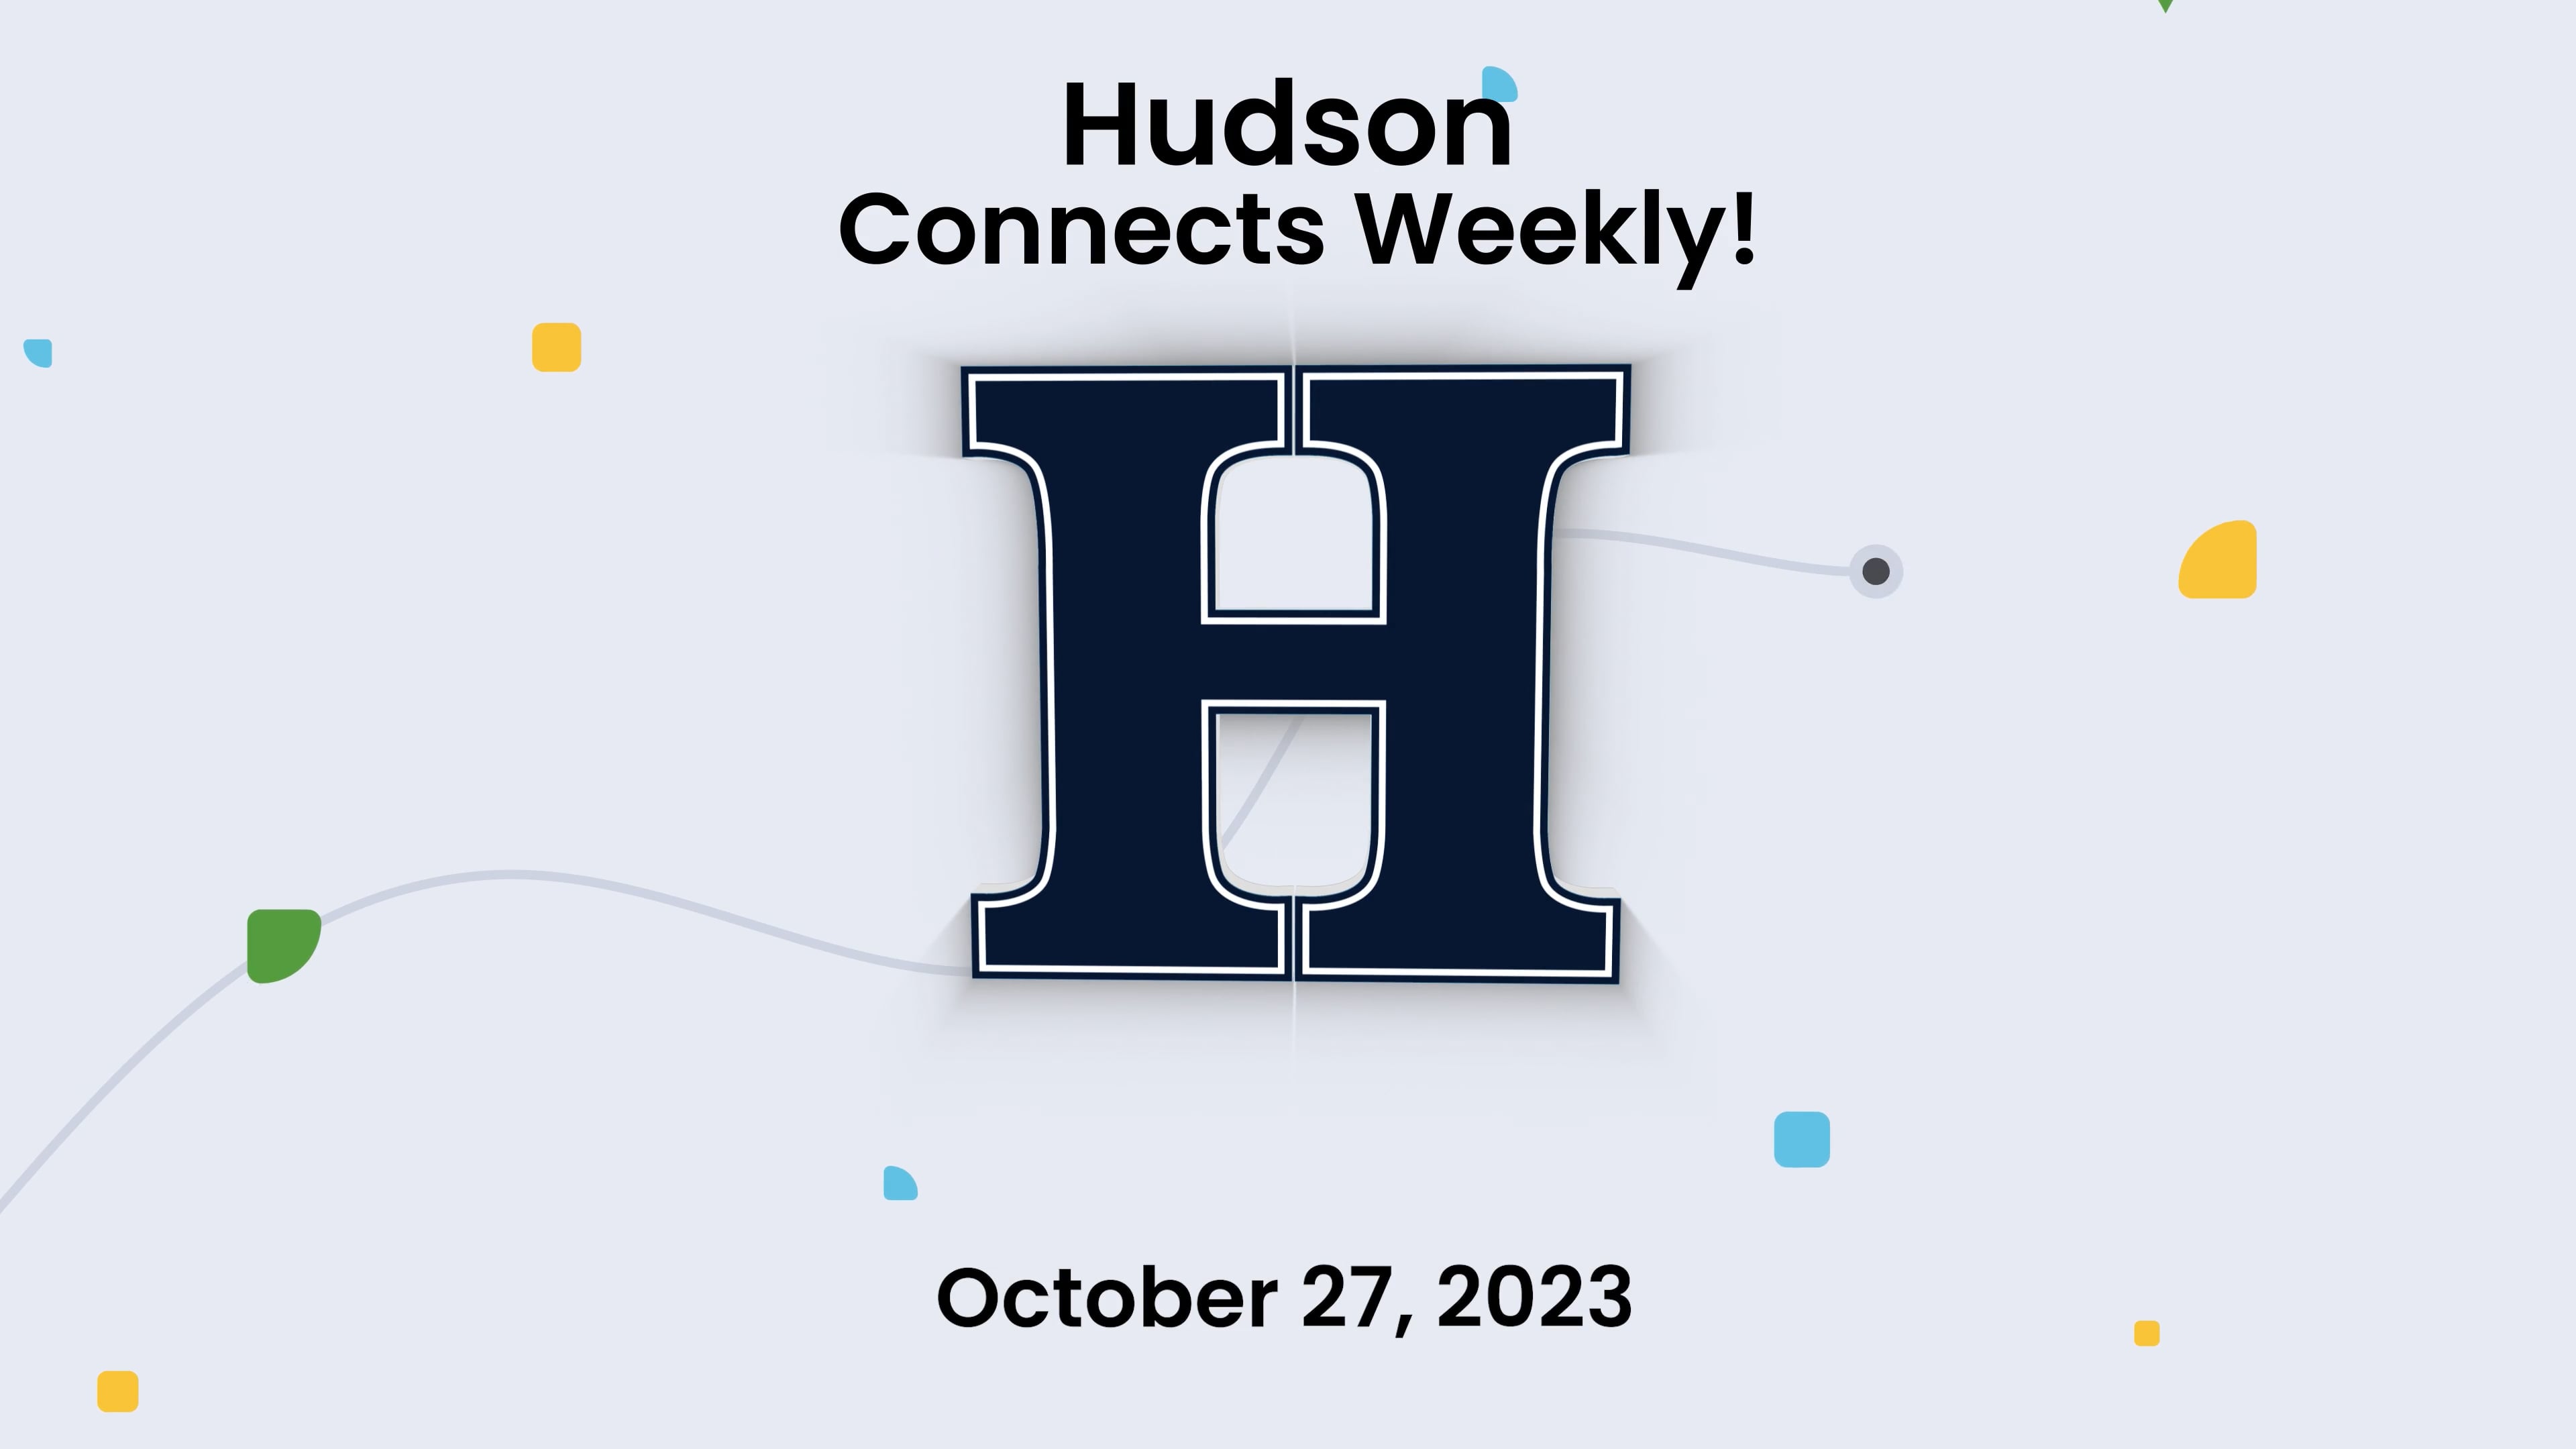 Hudson Connects Weekly - October 27, 2023